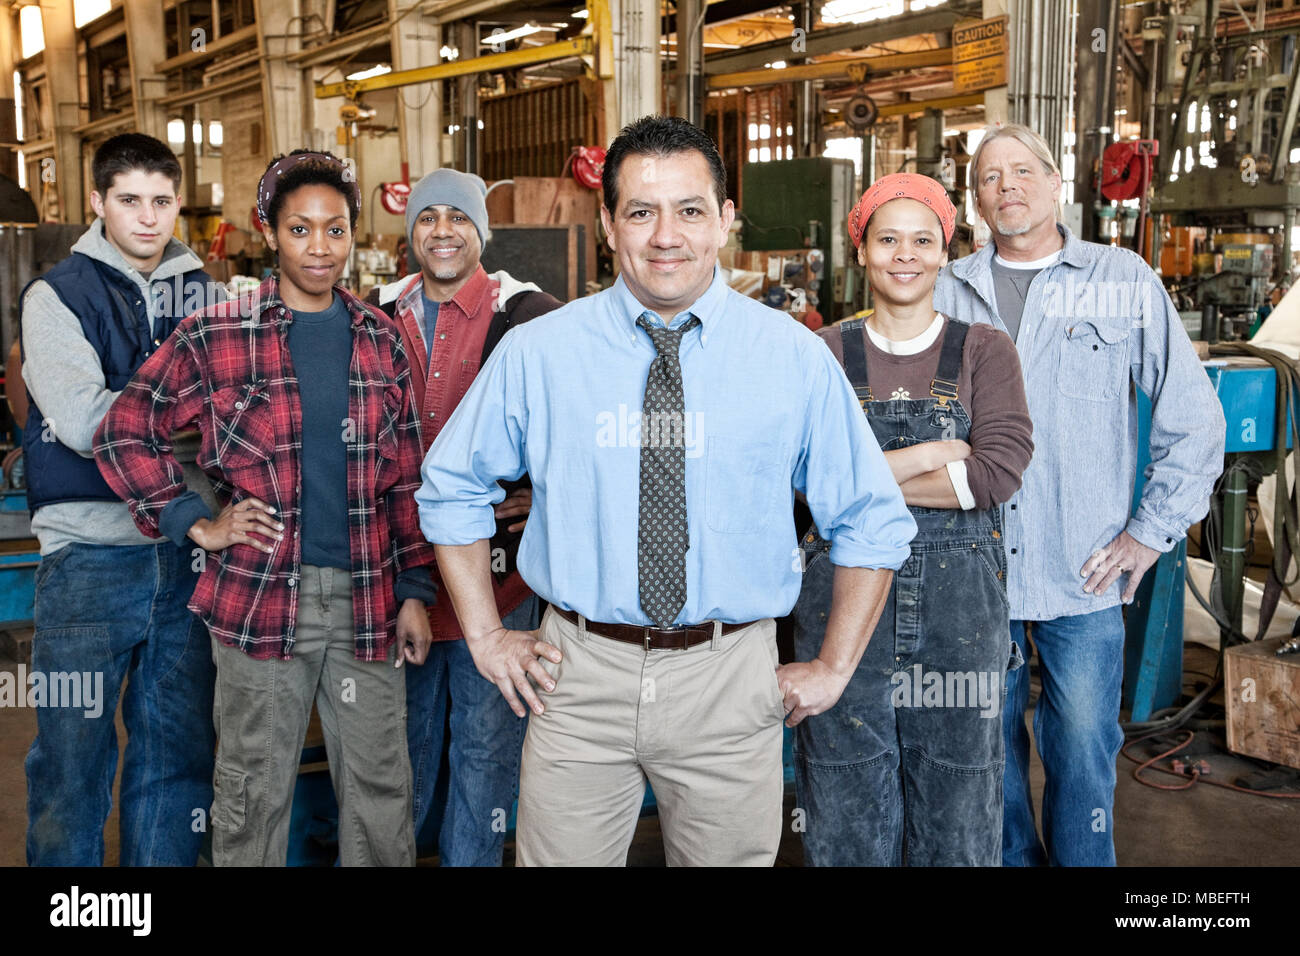 A group of 6 people, workforce workers at a factory, mixed ages and mixed ethnicities, ethnic diversity, women and men. Stock Photo